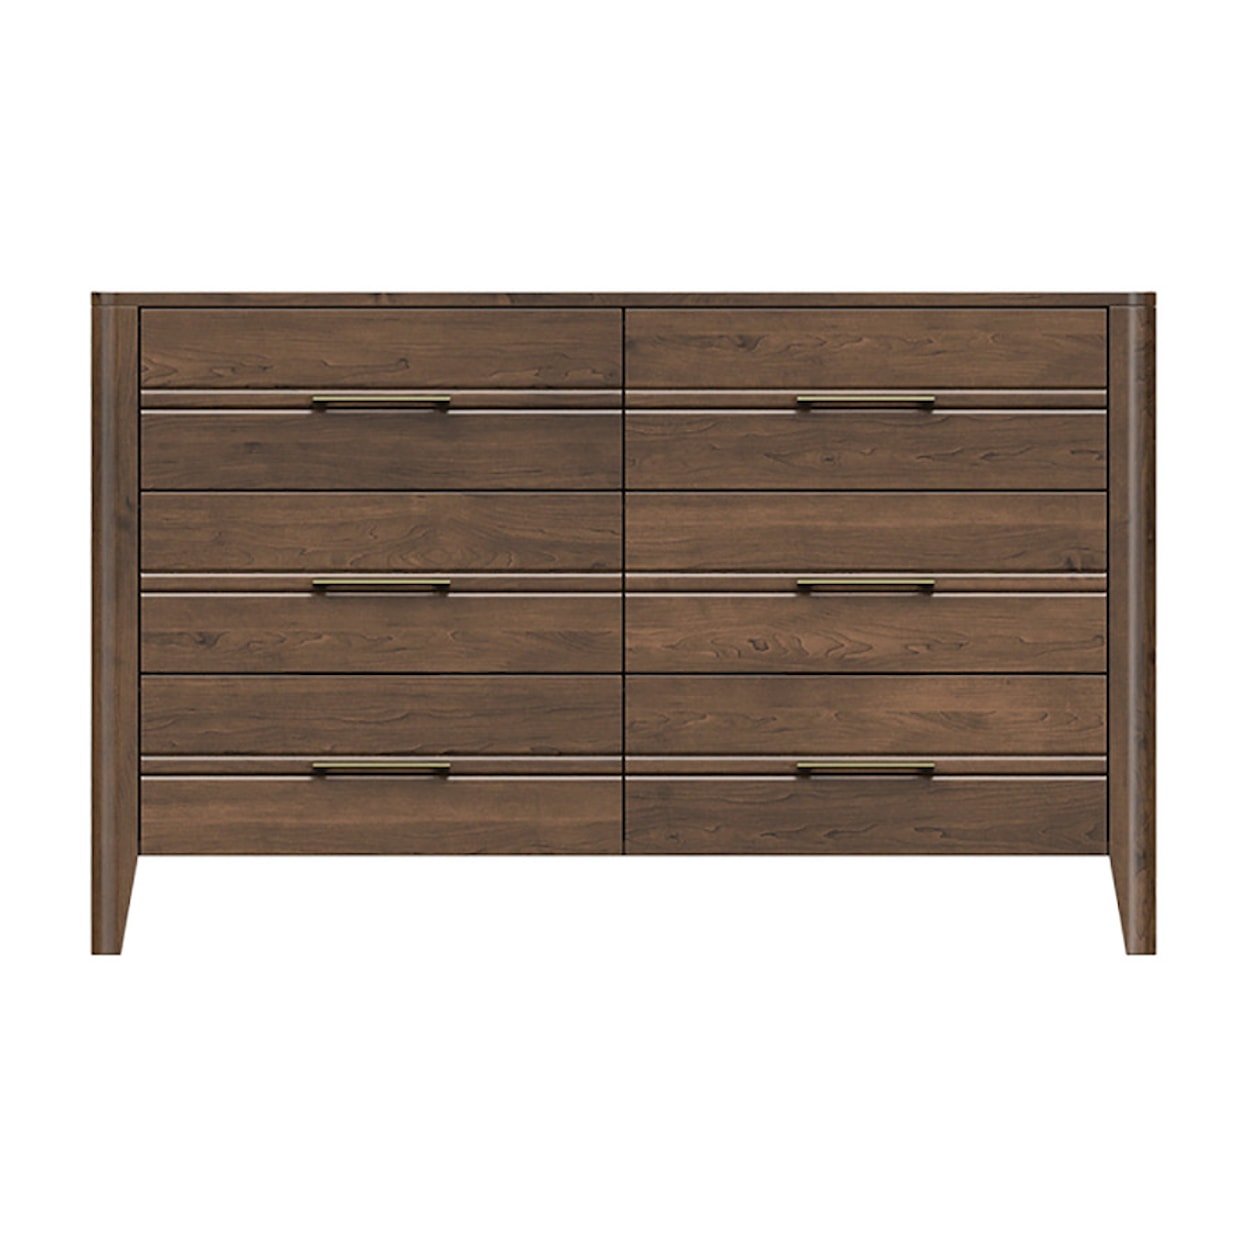 Country View Woodworking Westwood Bedroom Dresser